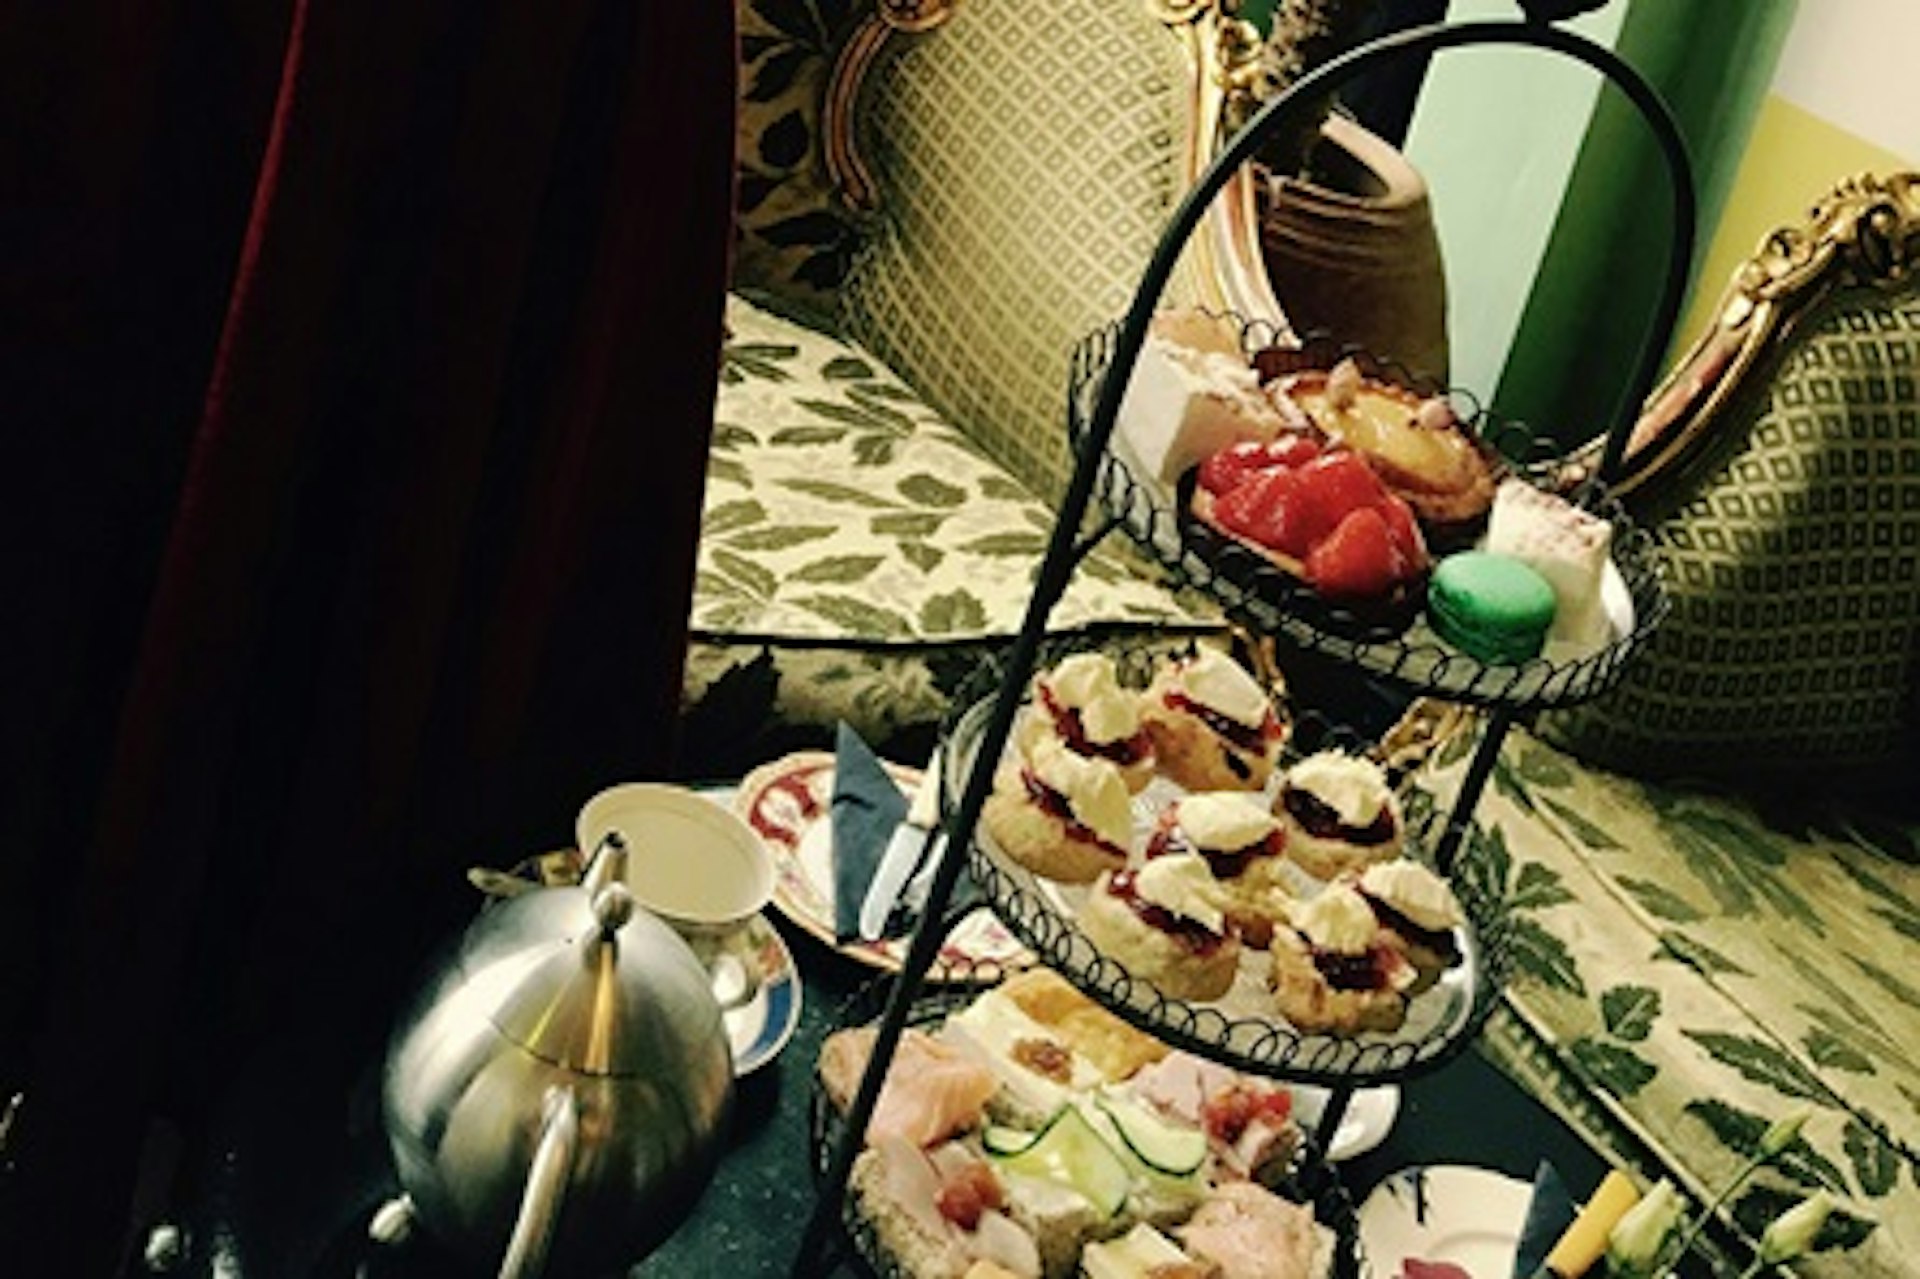 Prosecco Afternoon Tea for Two at Metrodeco Tea Salon, Brighton 2